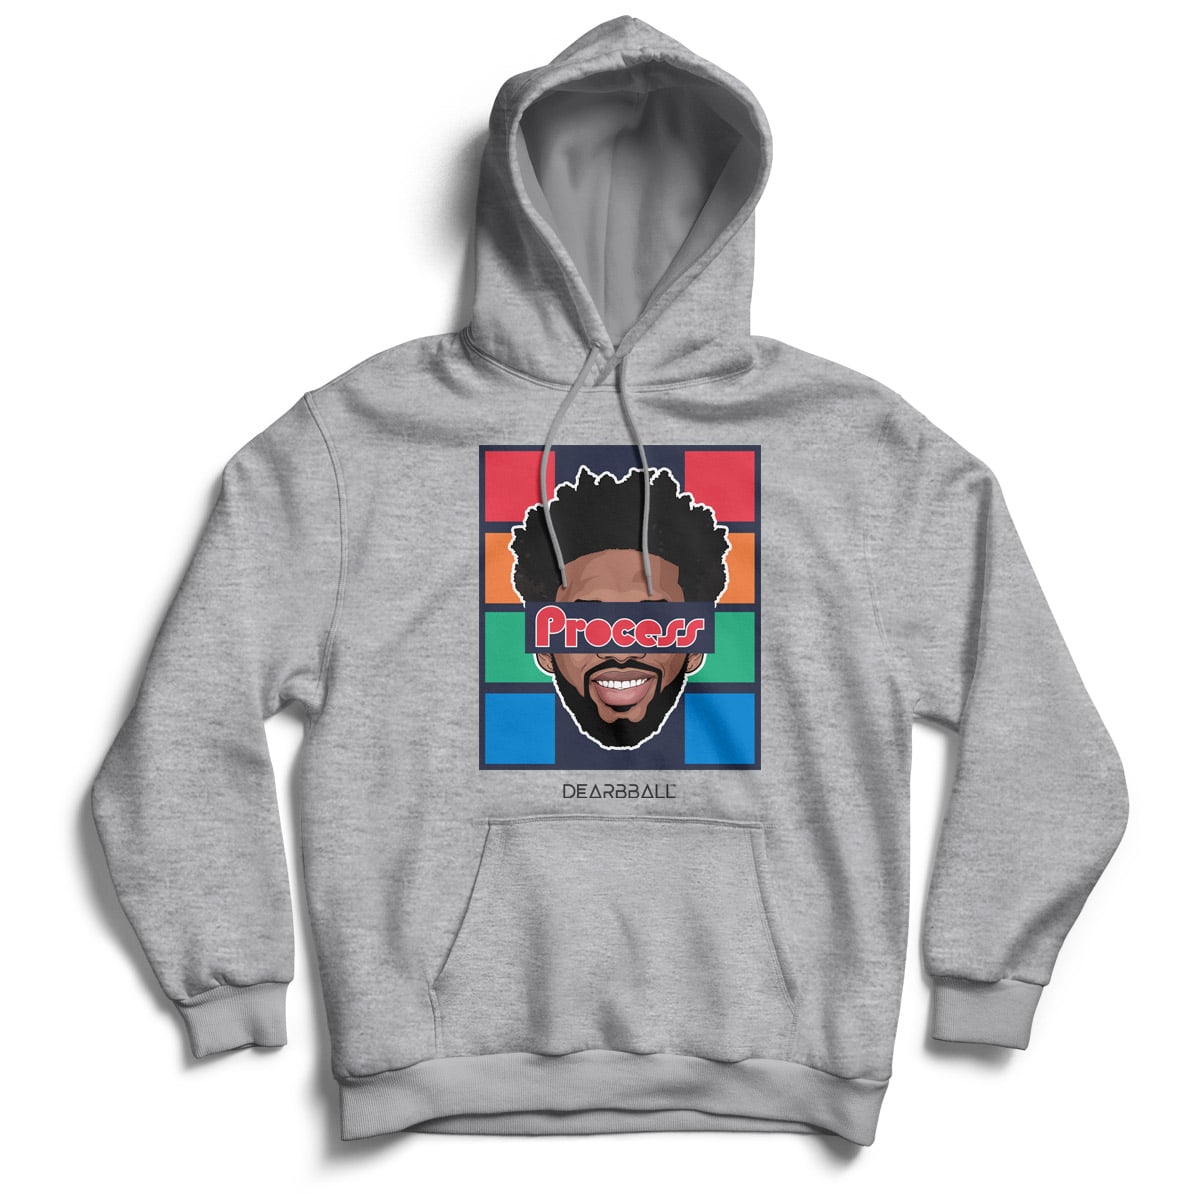 [CHILDREN] DearBBall Hooded Sweatshirt - Process Philly 70s Edition